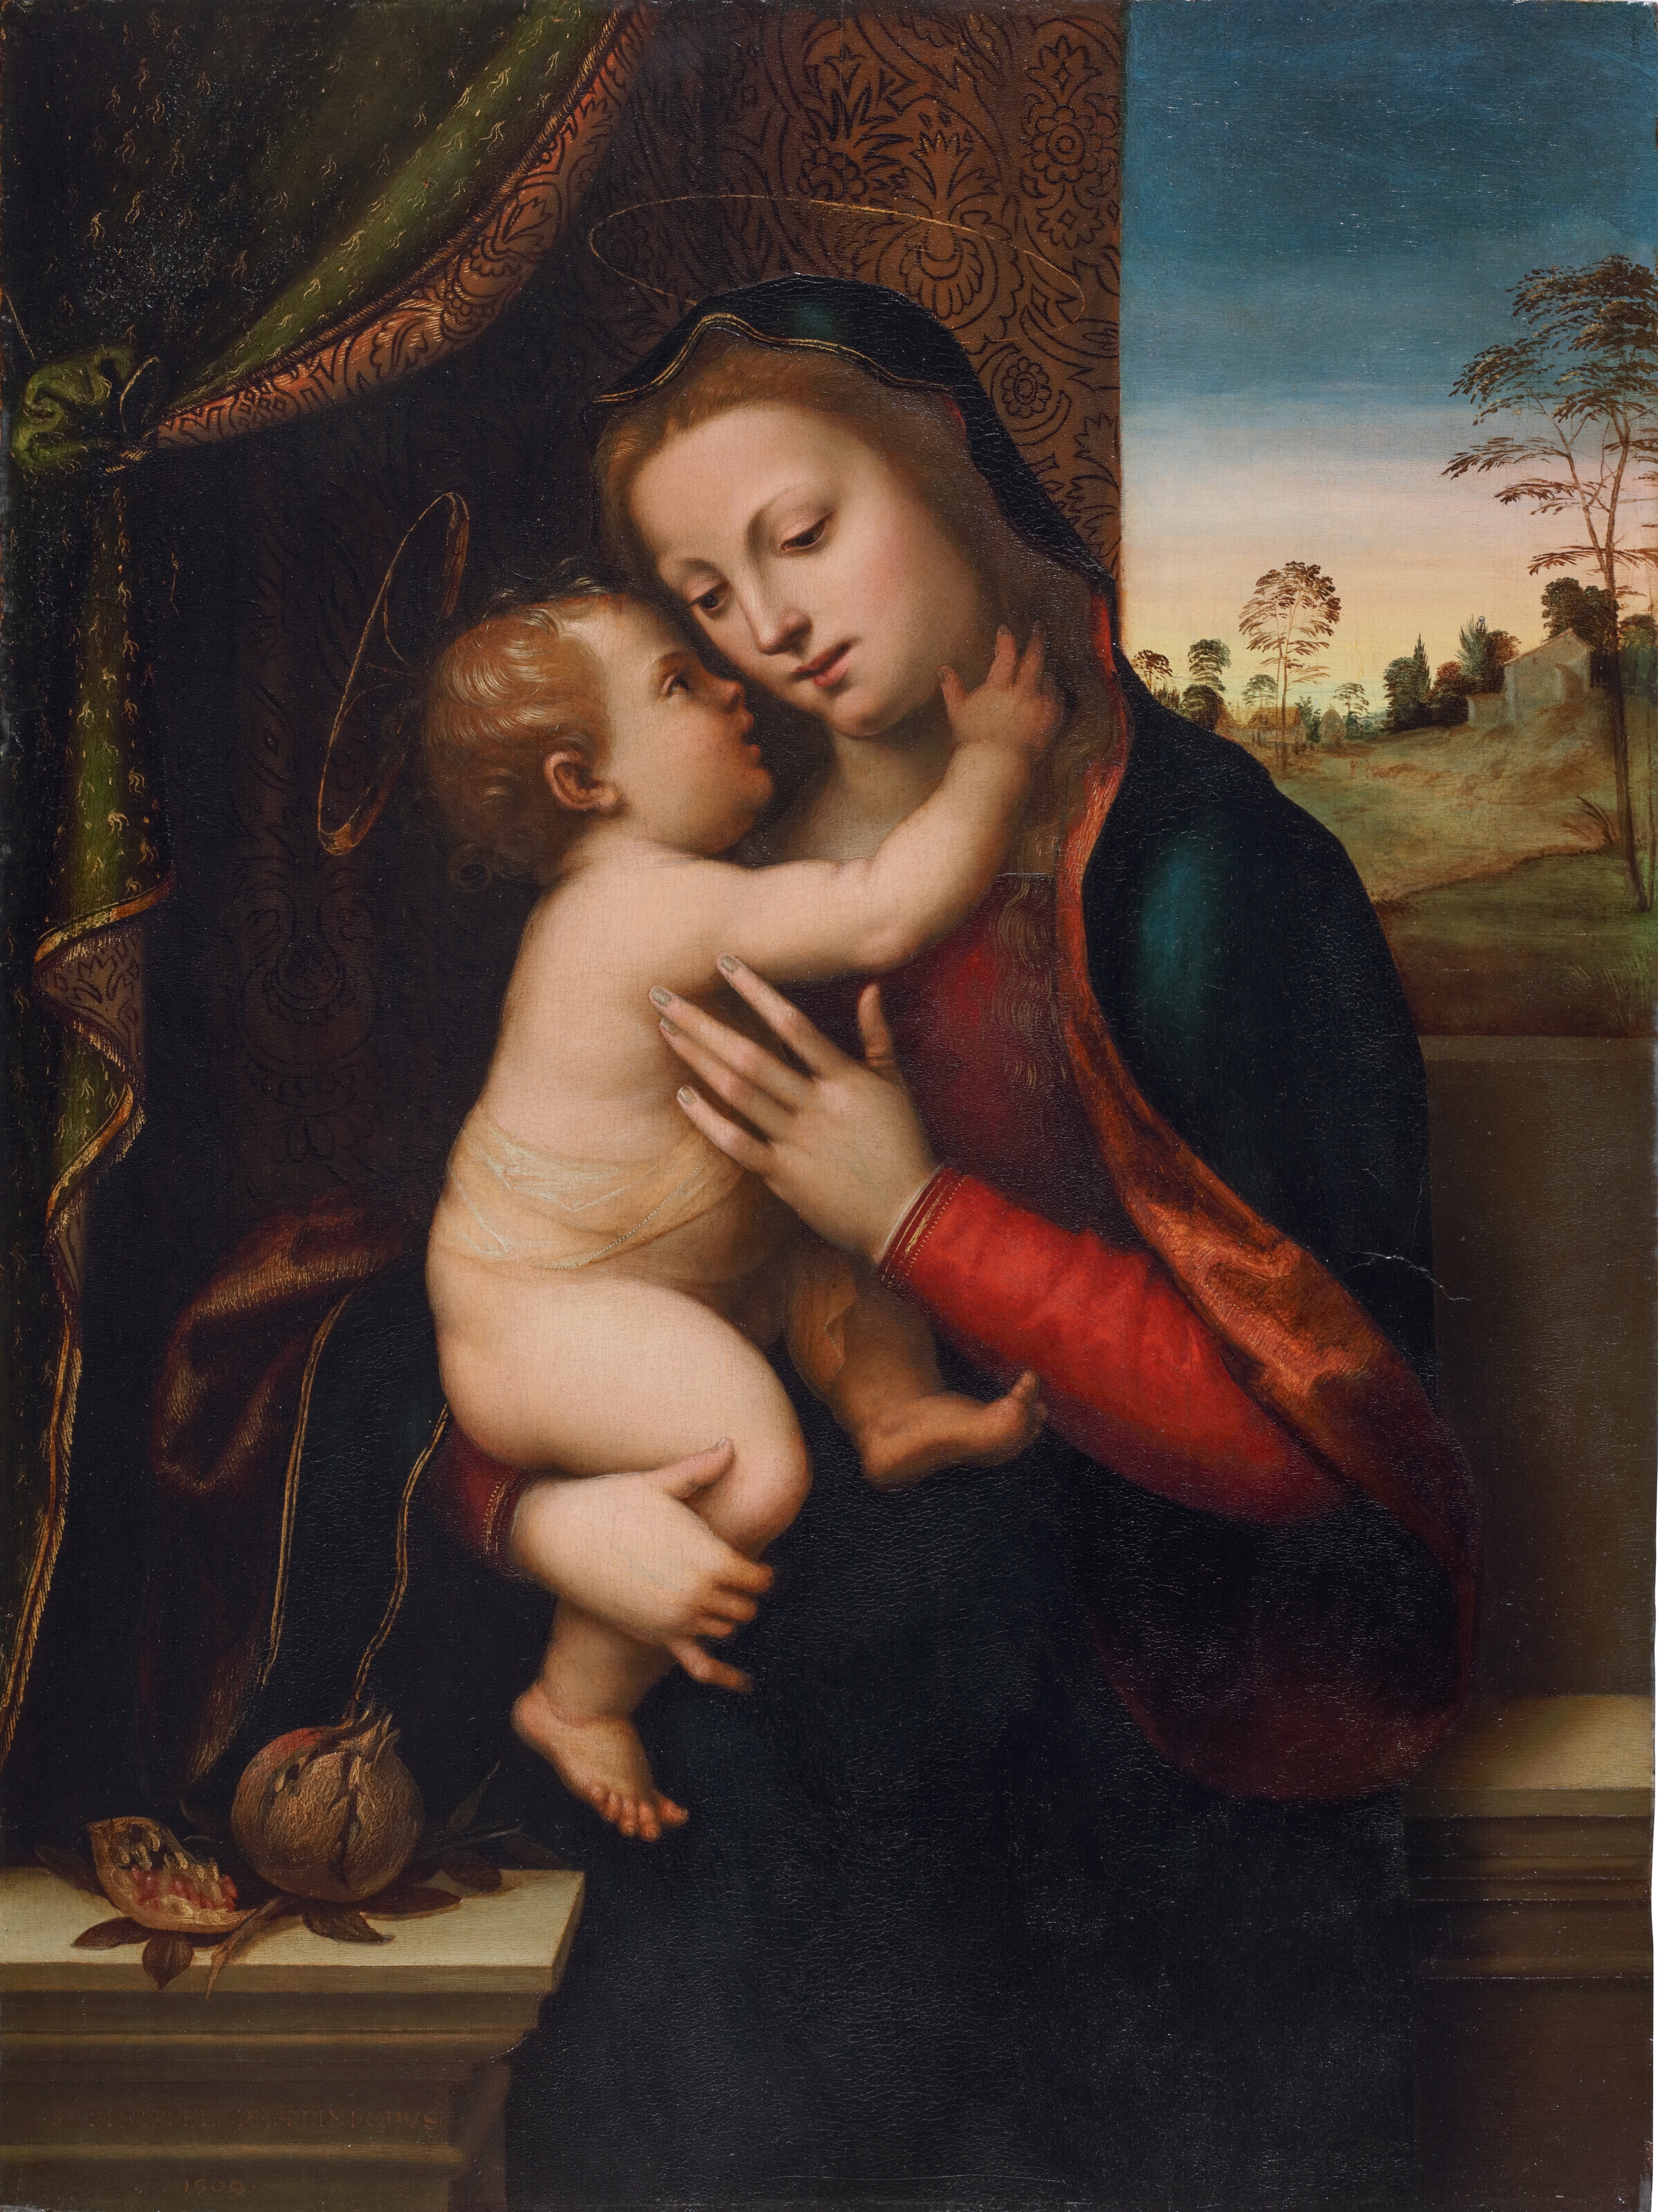 The Madonna and Child before a window with a landscape beyond - Mariotto Albertinelli